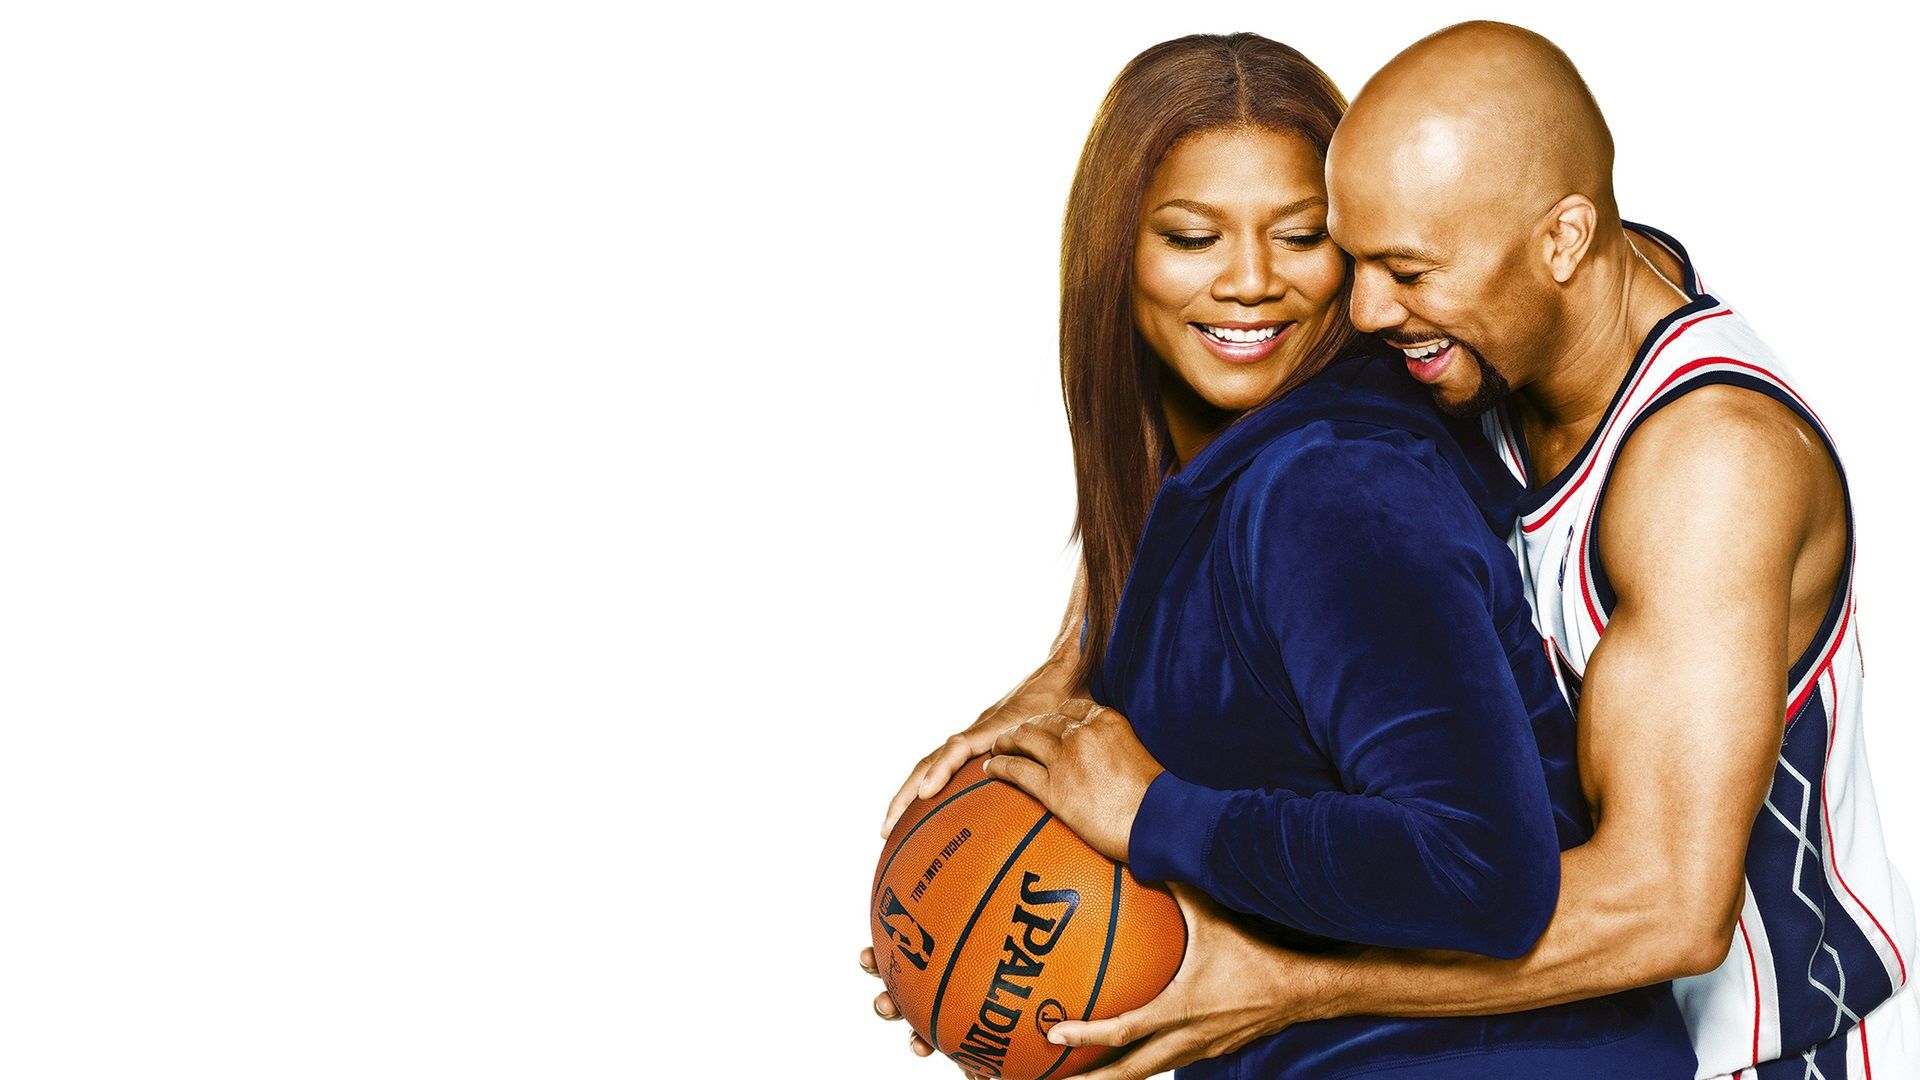 Just Wright background